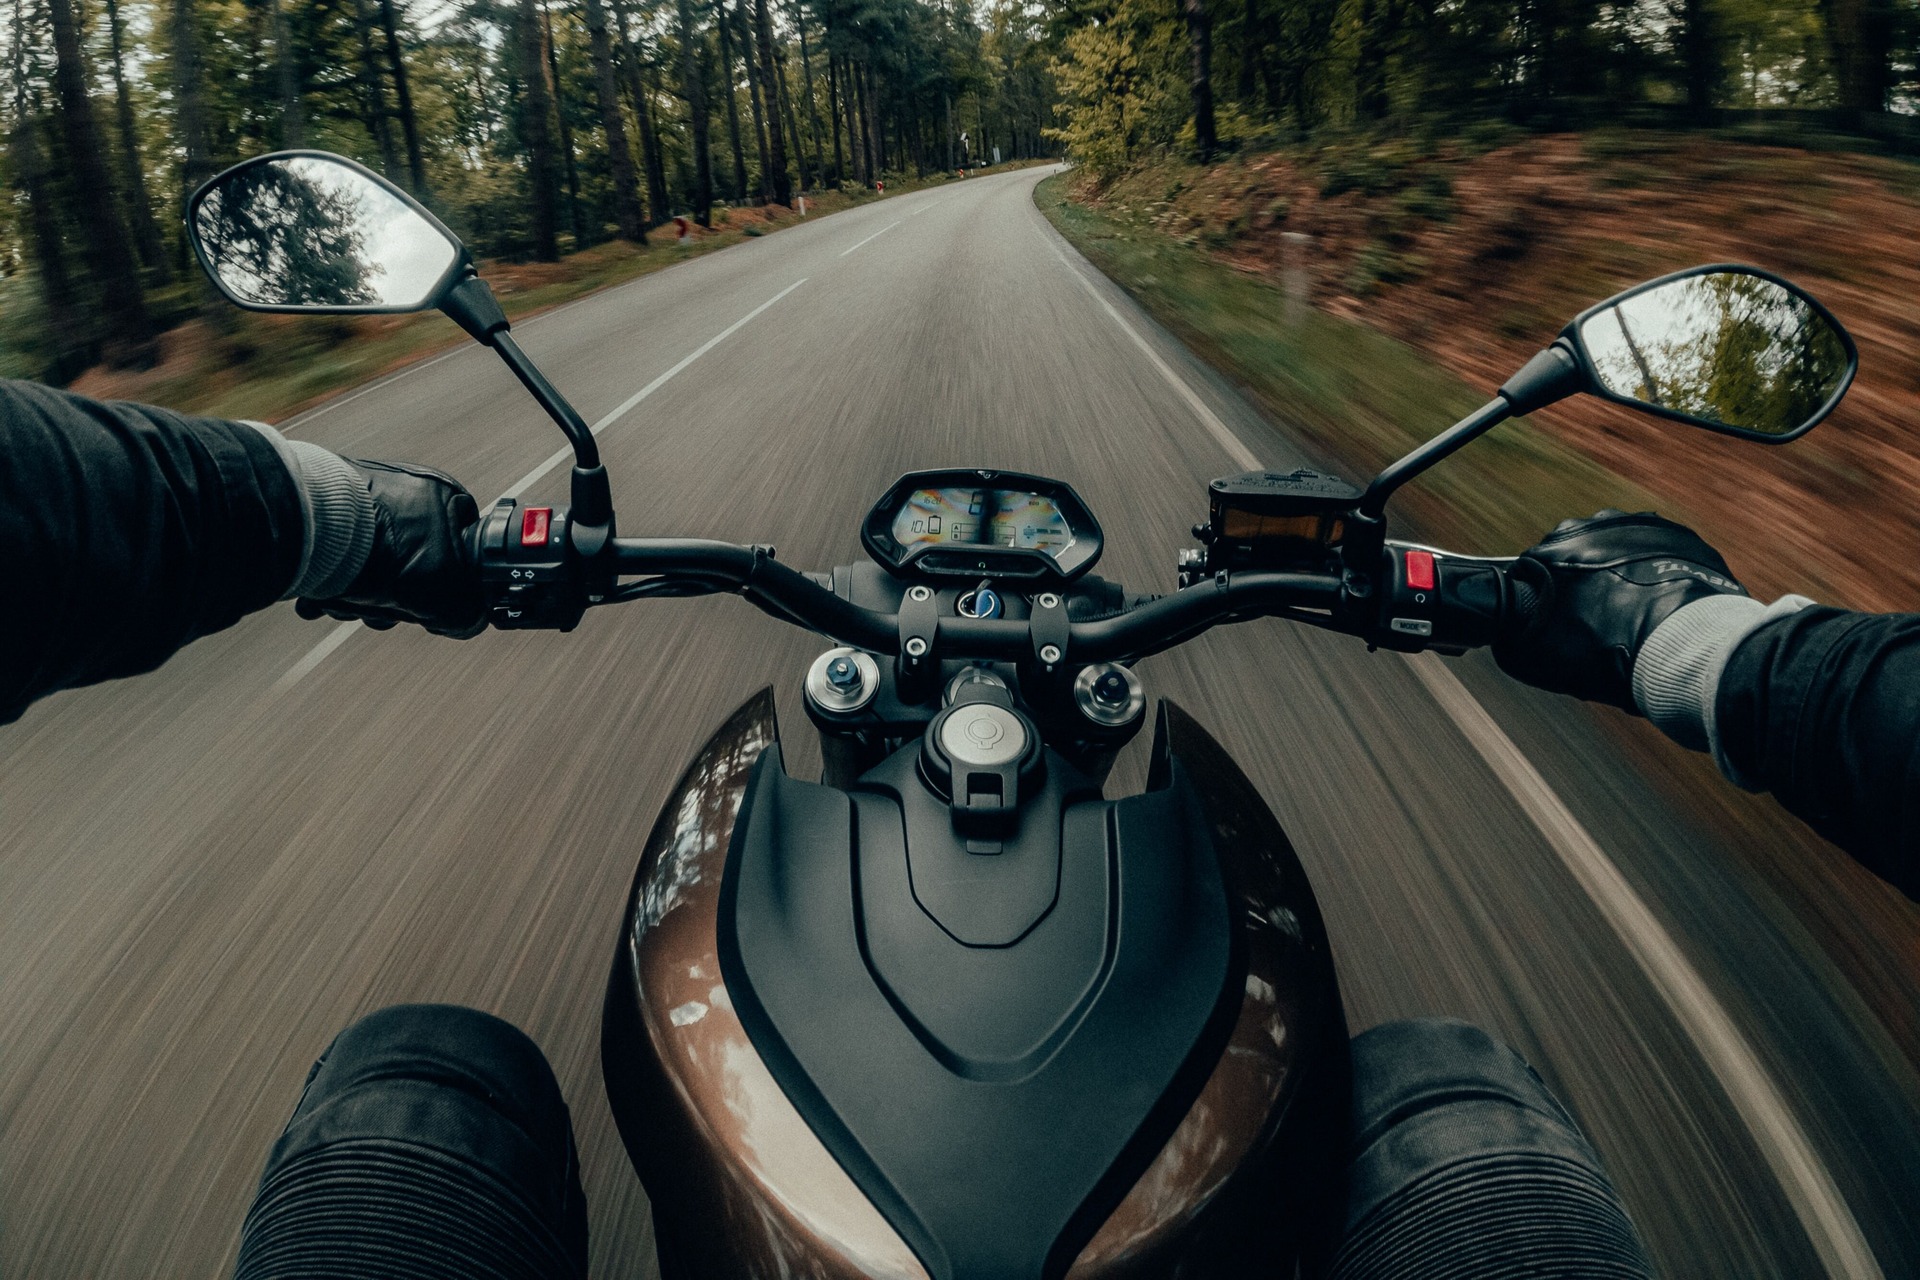 POV image of someone riding a motorcycle